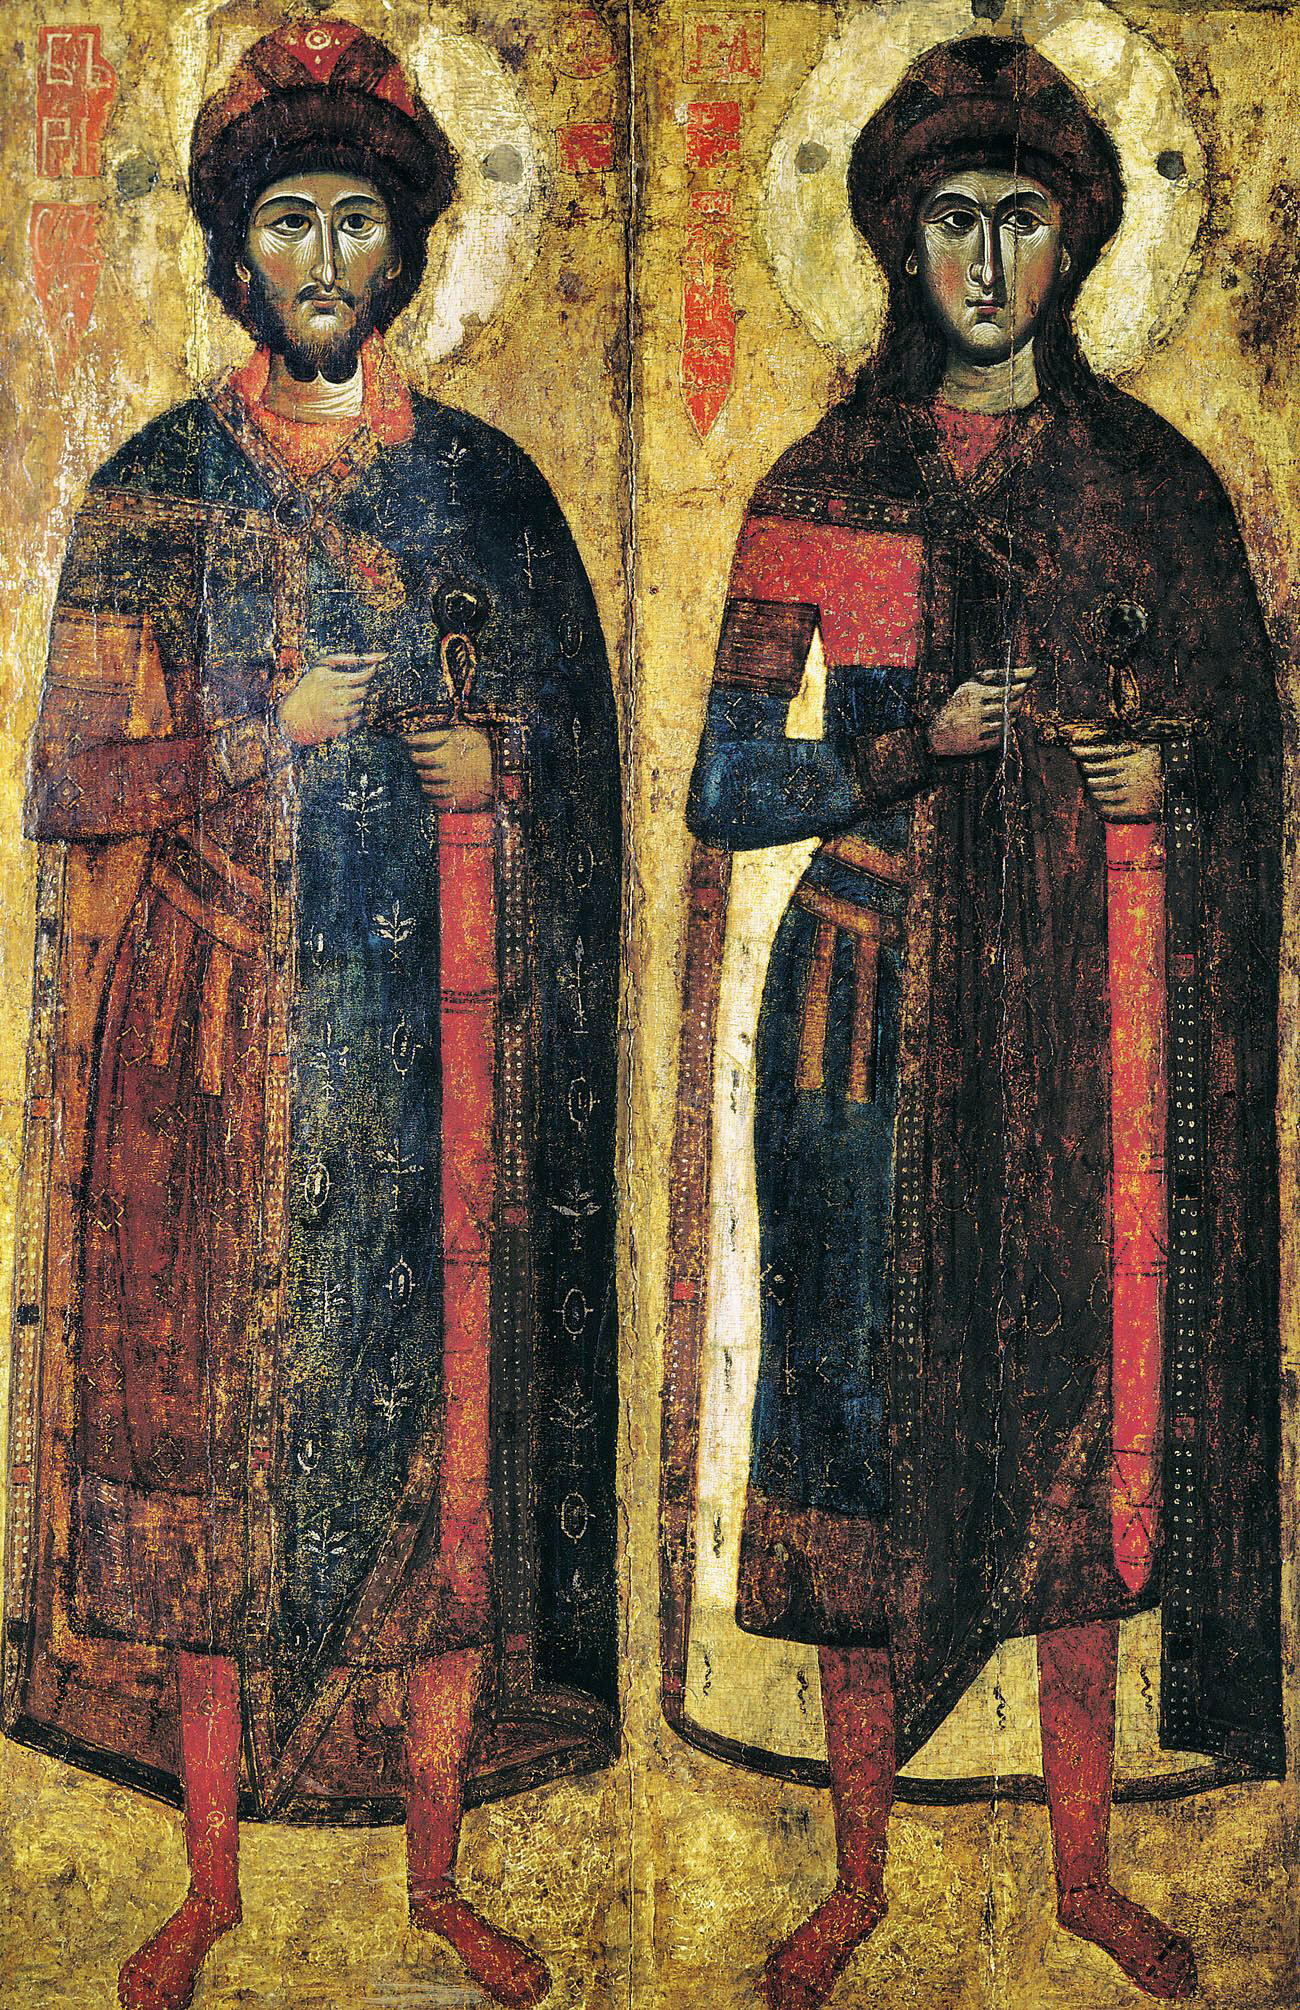 Boris and Gleb, one of the first Russian saints